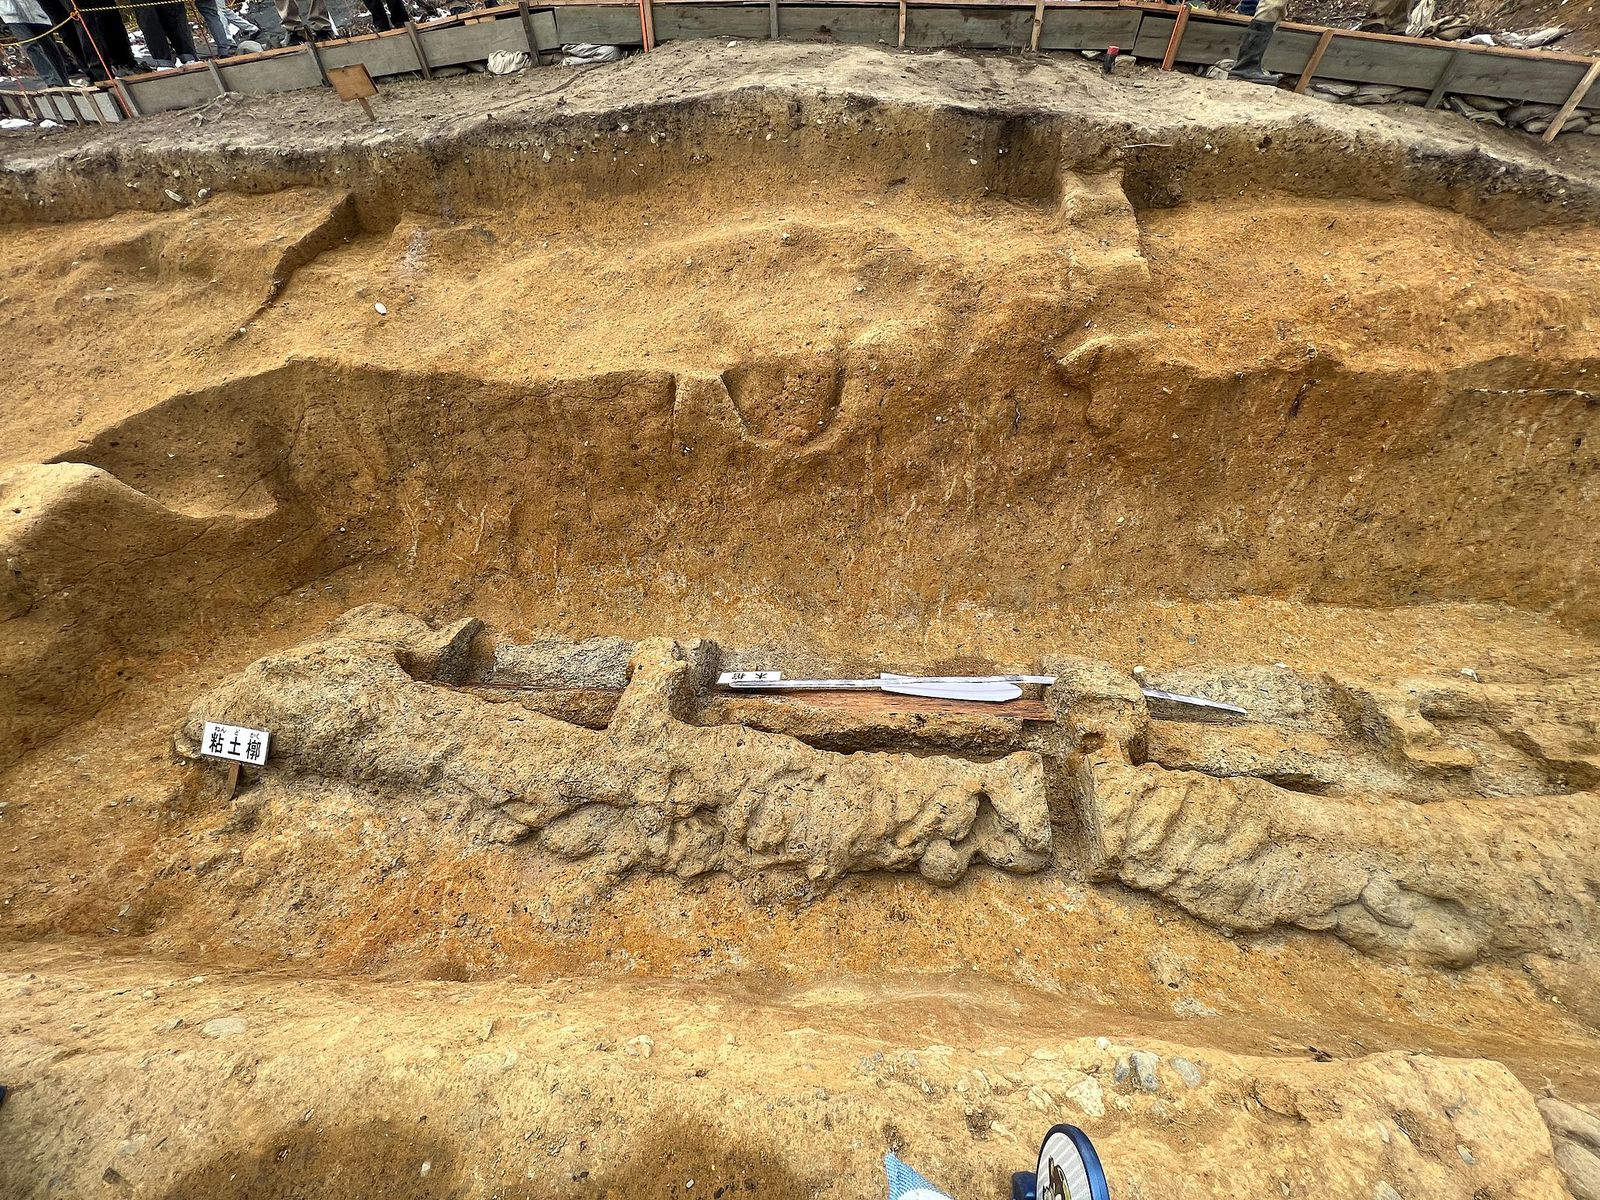 Seven-Foot Sword Unearthed From 1,600-Year-Old Burial Mound in Japan